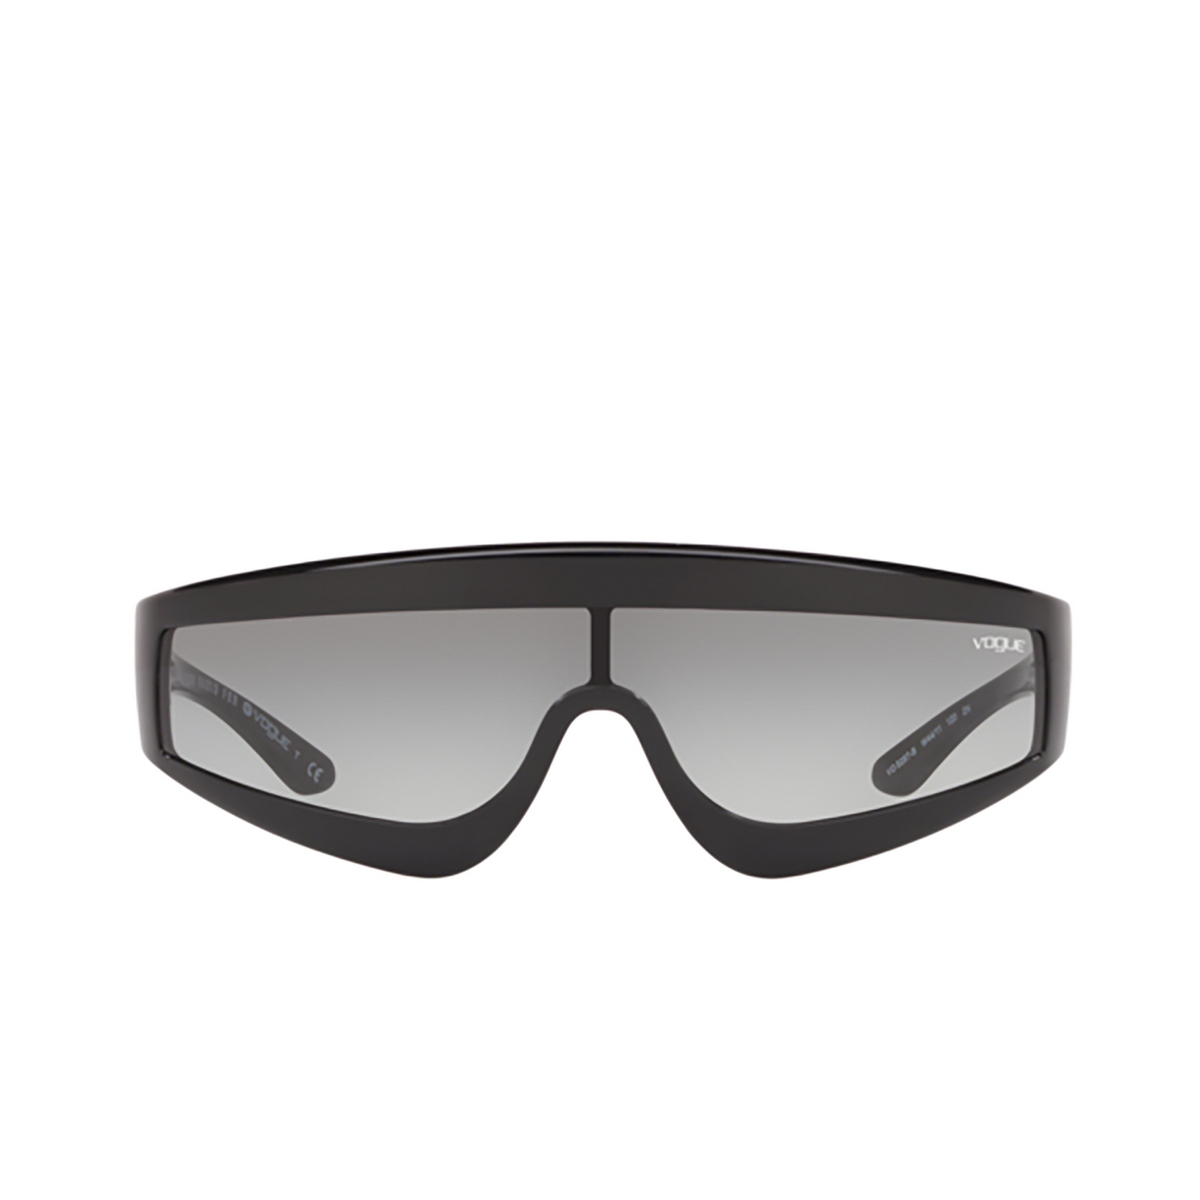 Vogue® Mask Sunglasses: Zoom-in VO5257S color Black W44/11 - product thumbnail 1/3.